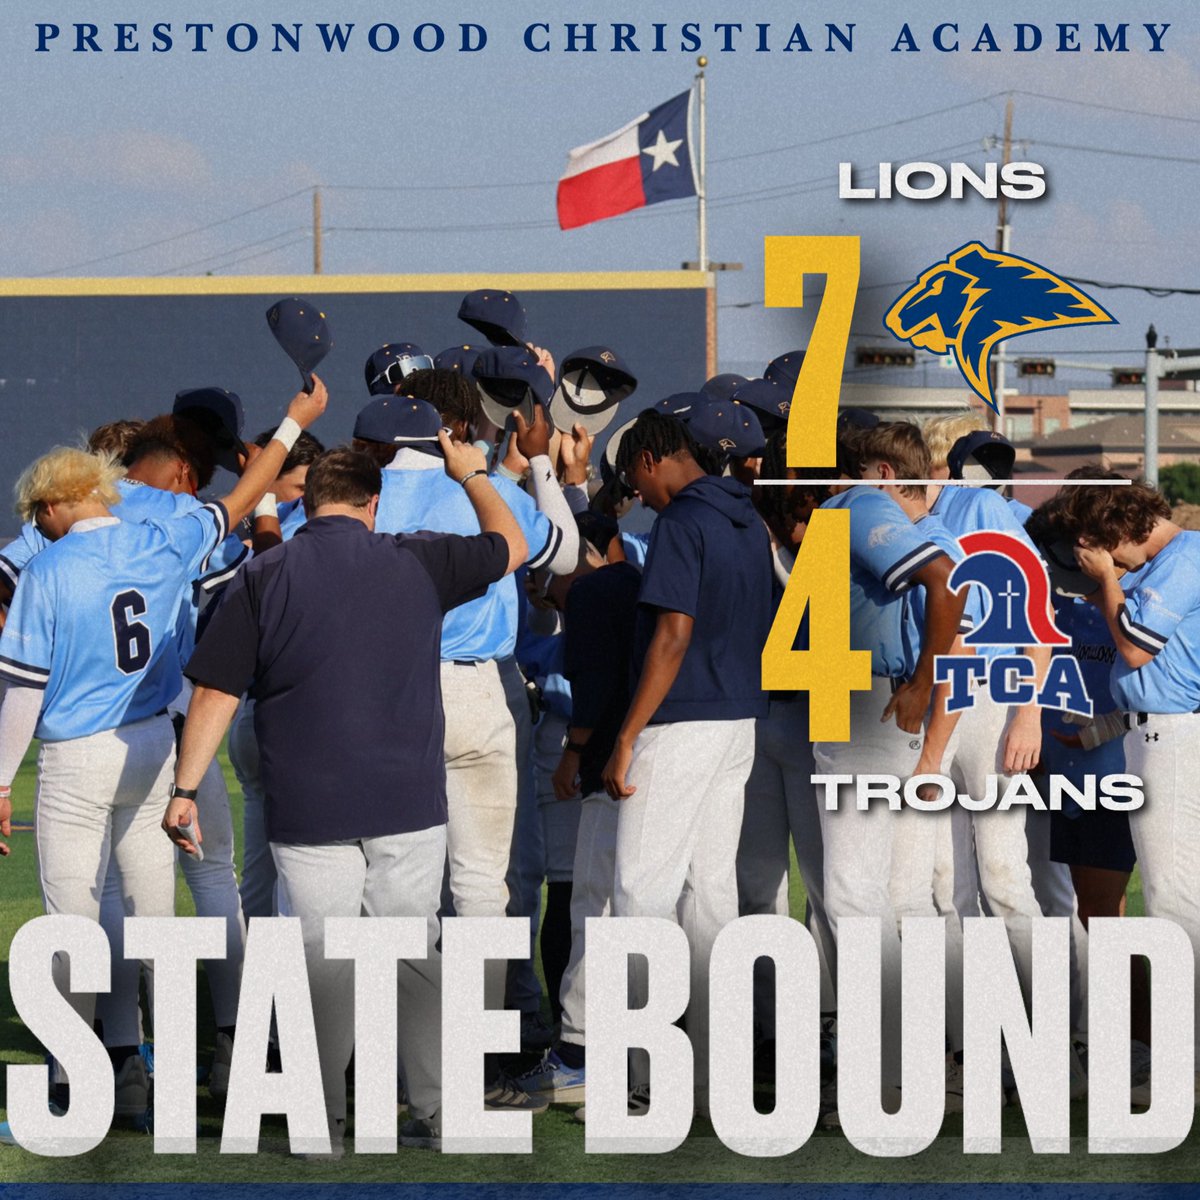 Your Lions have defeated the TCA Trojans and are REGIONAL CHAMPS! We are headed to State! GO LIONS!⚾ 🦁@prestonwood_bsb